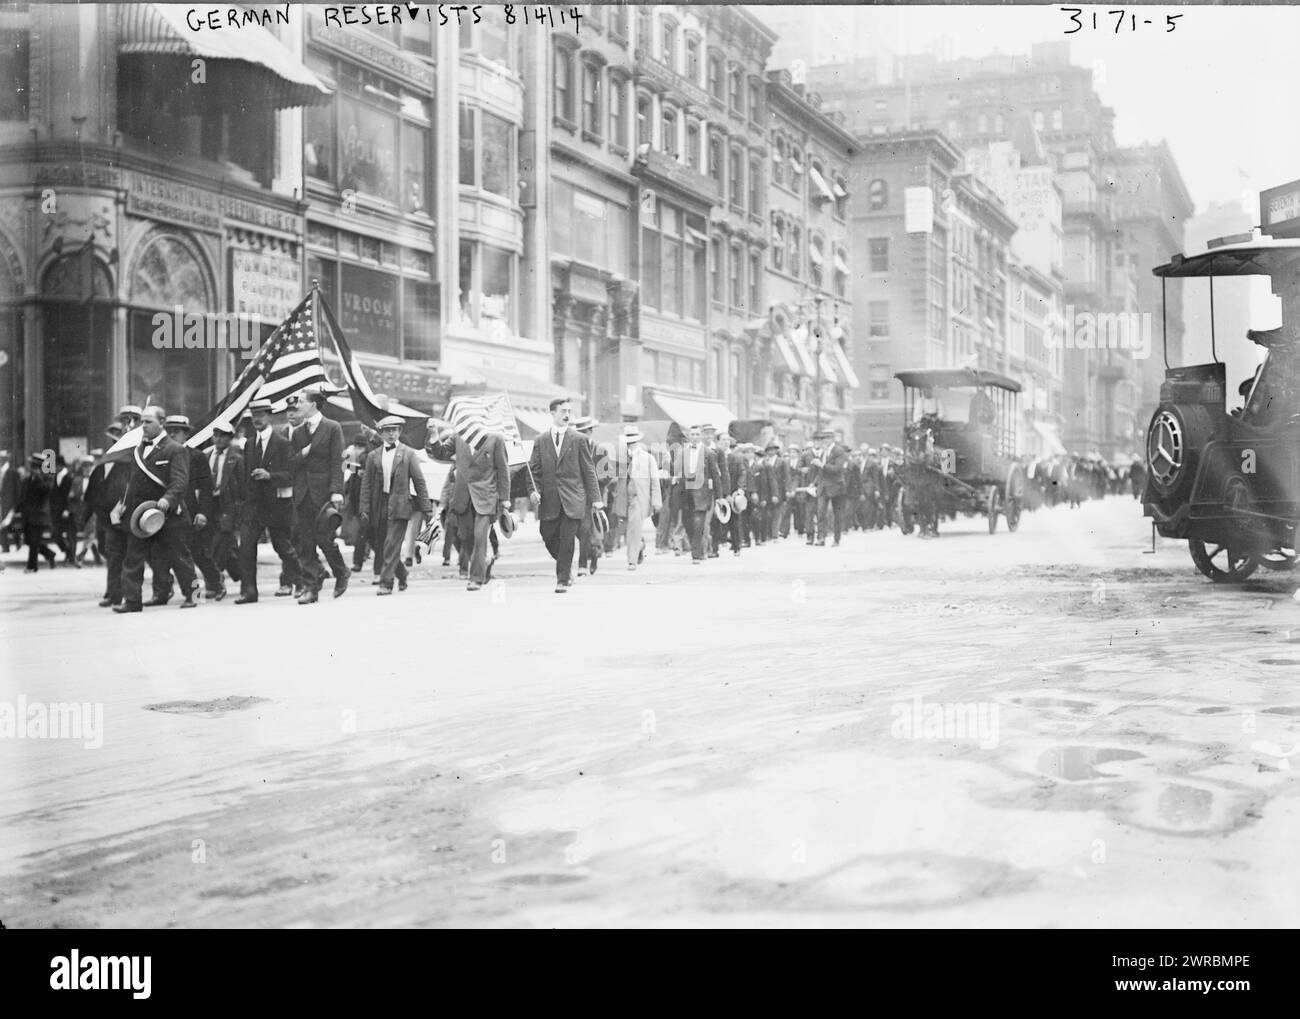 German Reservists, Photograph shows German reserve soldiers marching on Fifth Avenue, New York City, at the beginning of World War I., 1914 Aug. 4, World War, 1914-1918, Glass negatives, 1 negative: glass Stock Photo